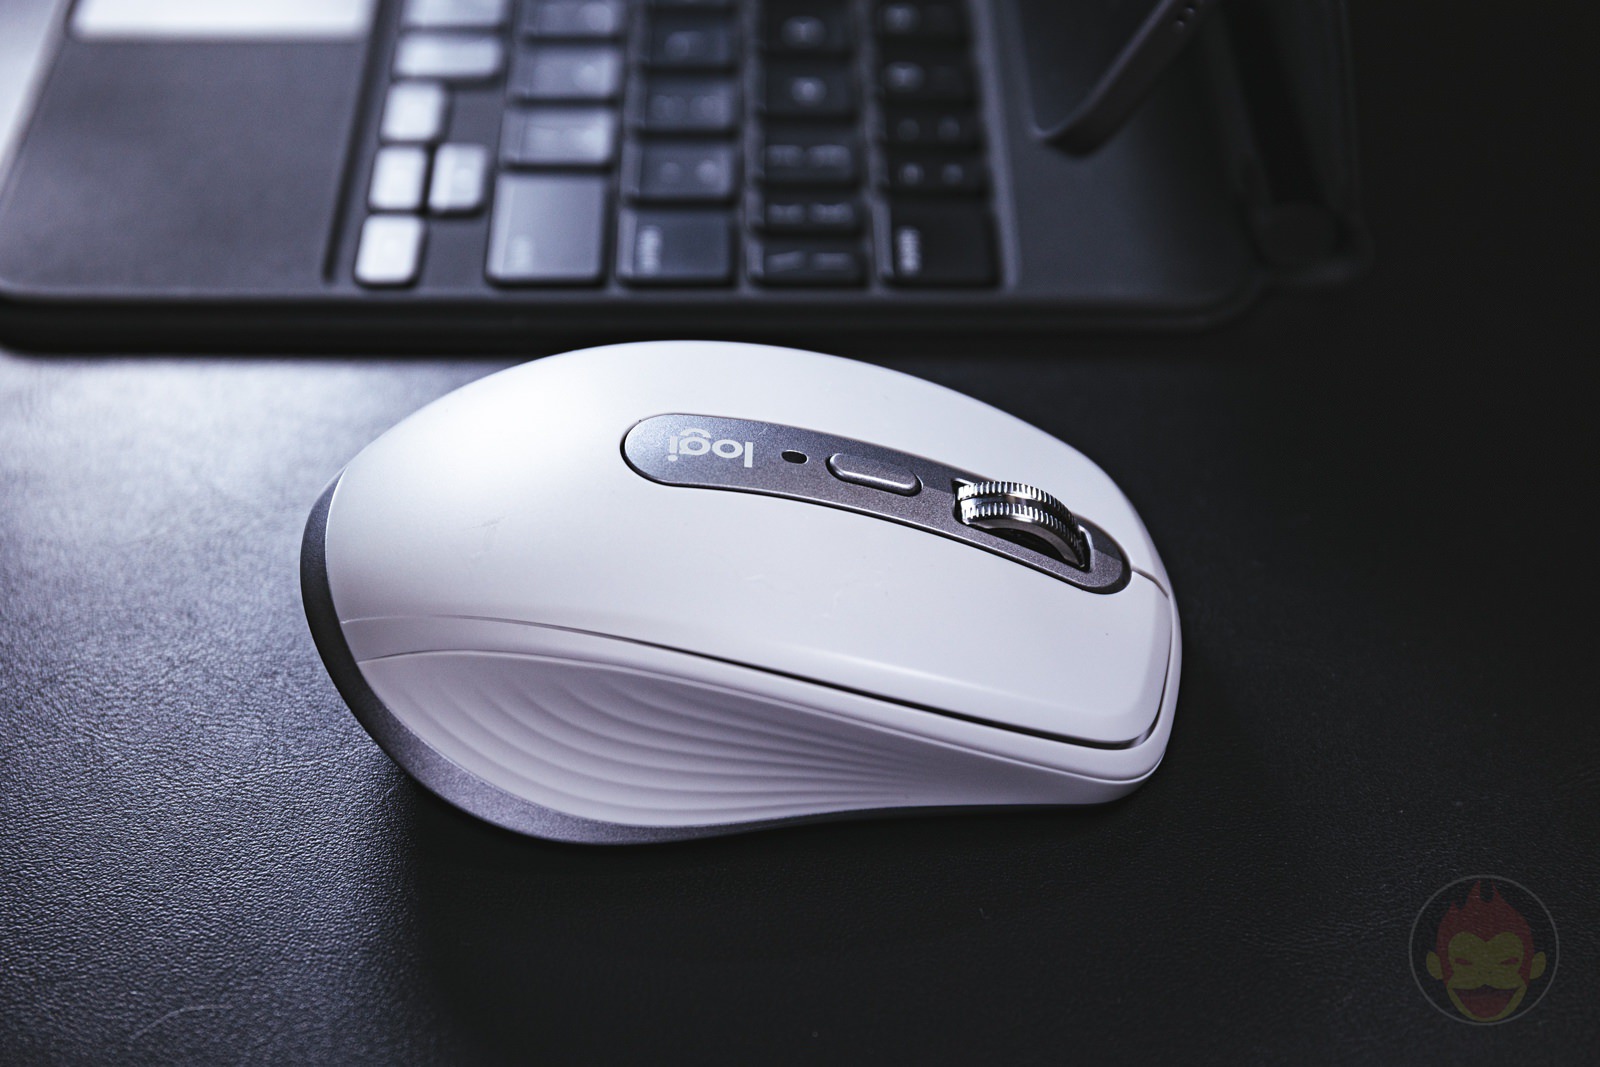 Logicool MX Anywhere 3 Mouse Review 11